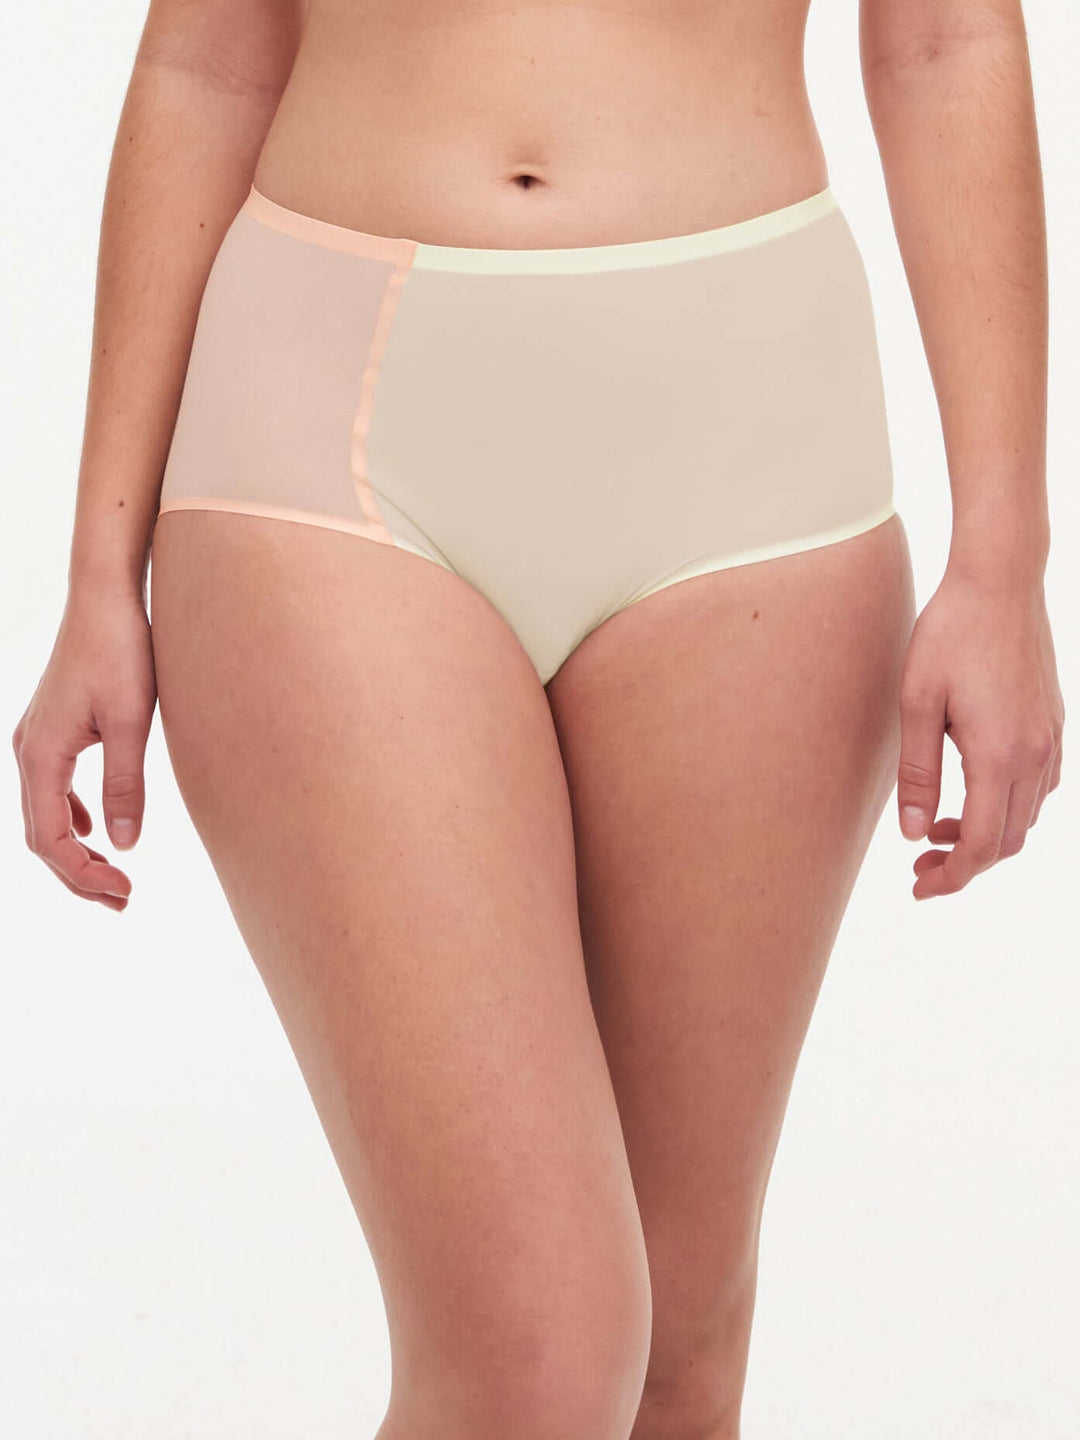 Chantelle Softstretch Calzoncillo completo - Abedul plateado / Melocotón Calzoncillo completo Chantelle